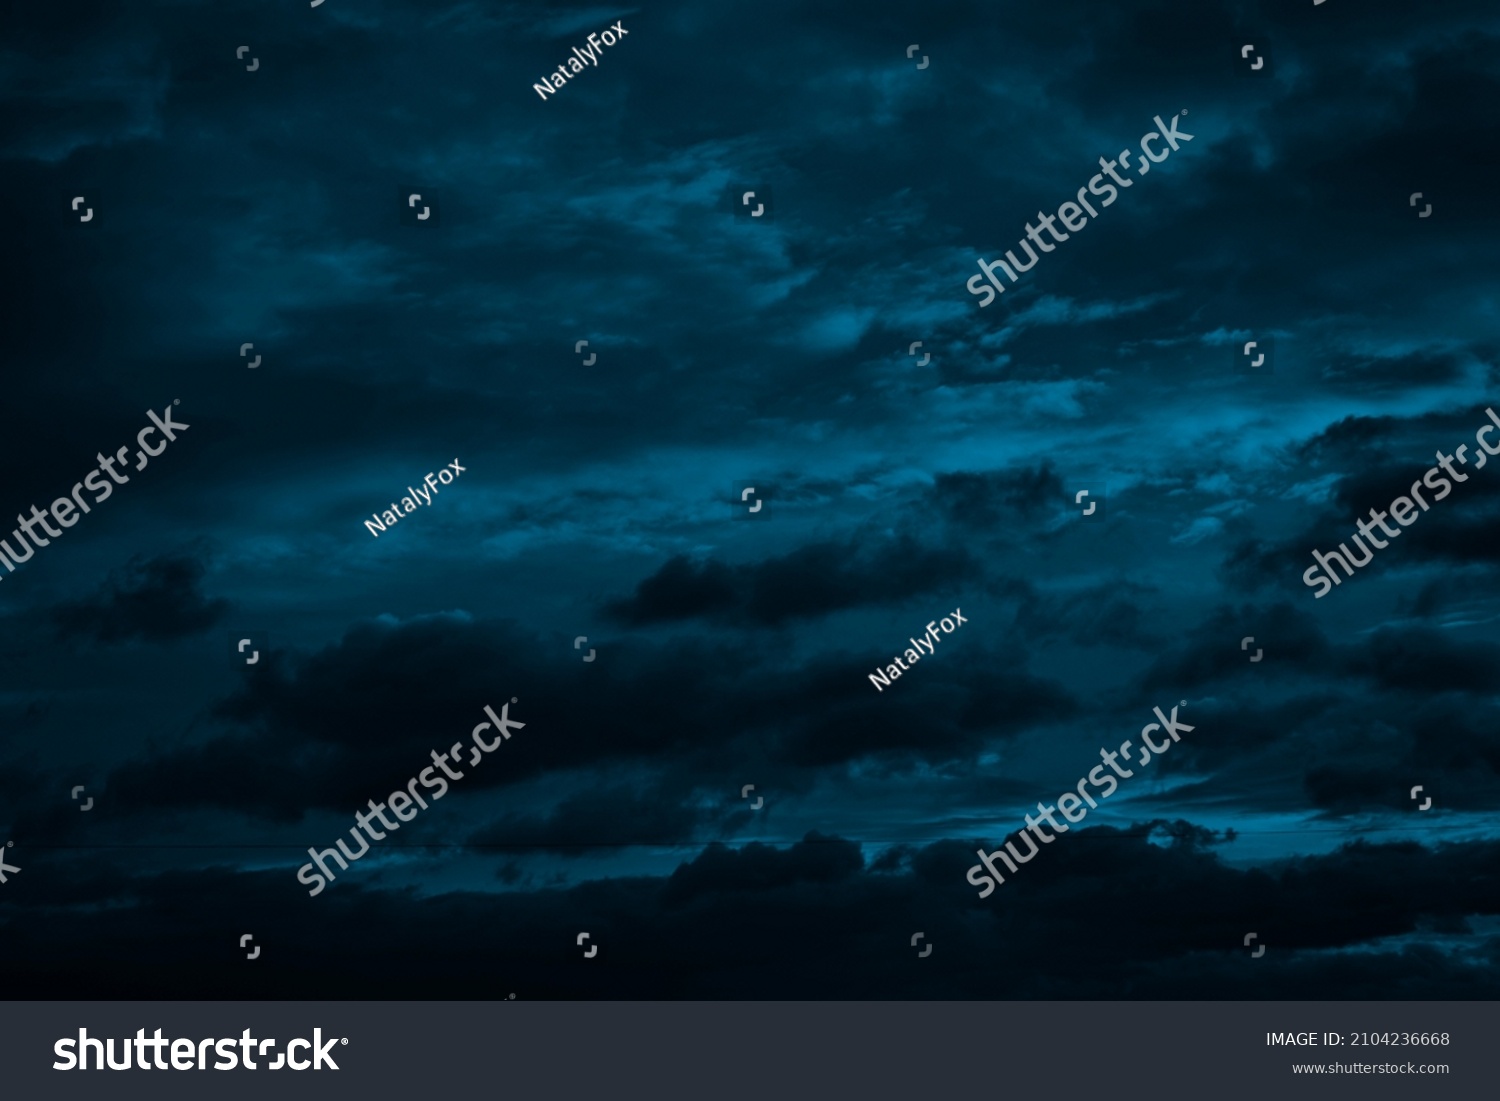  Dramatic sky with clouds. Black blue green night sky. Thunderstorm. Dark teal color background. Ominous,  frightening.                             #2104236668